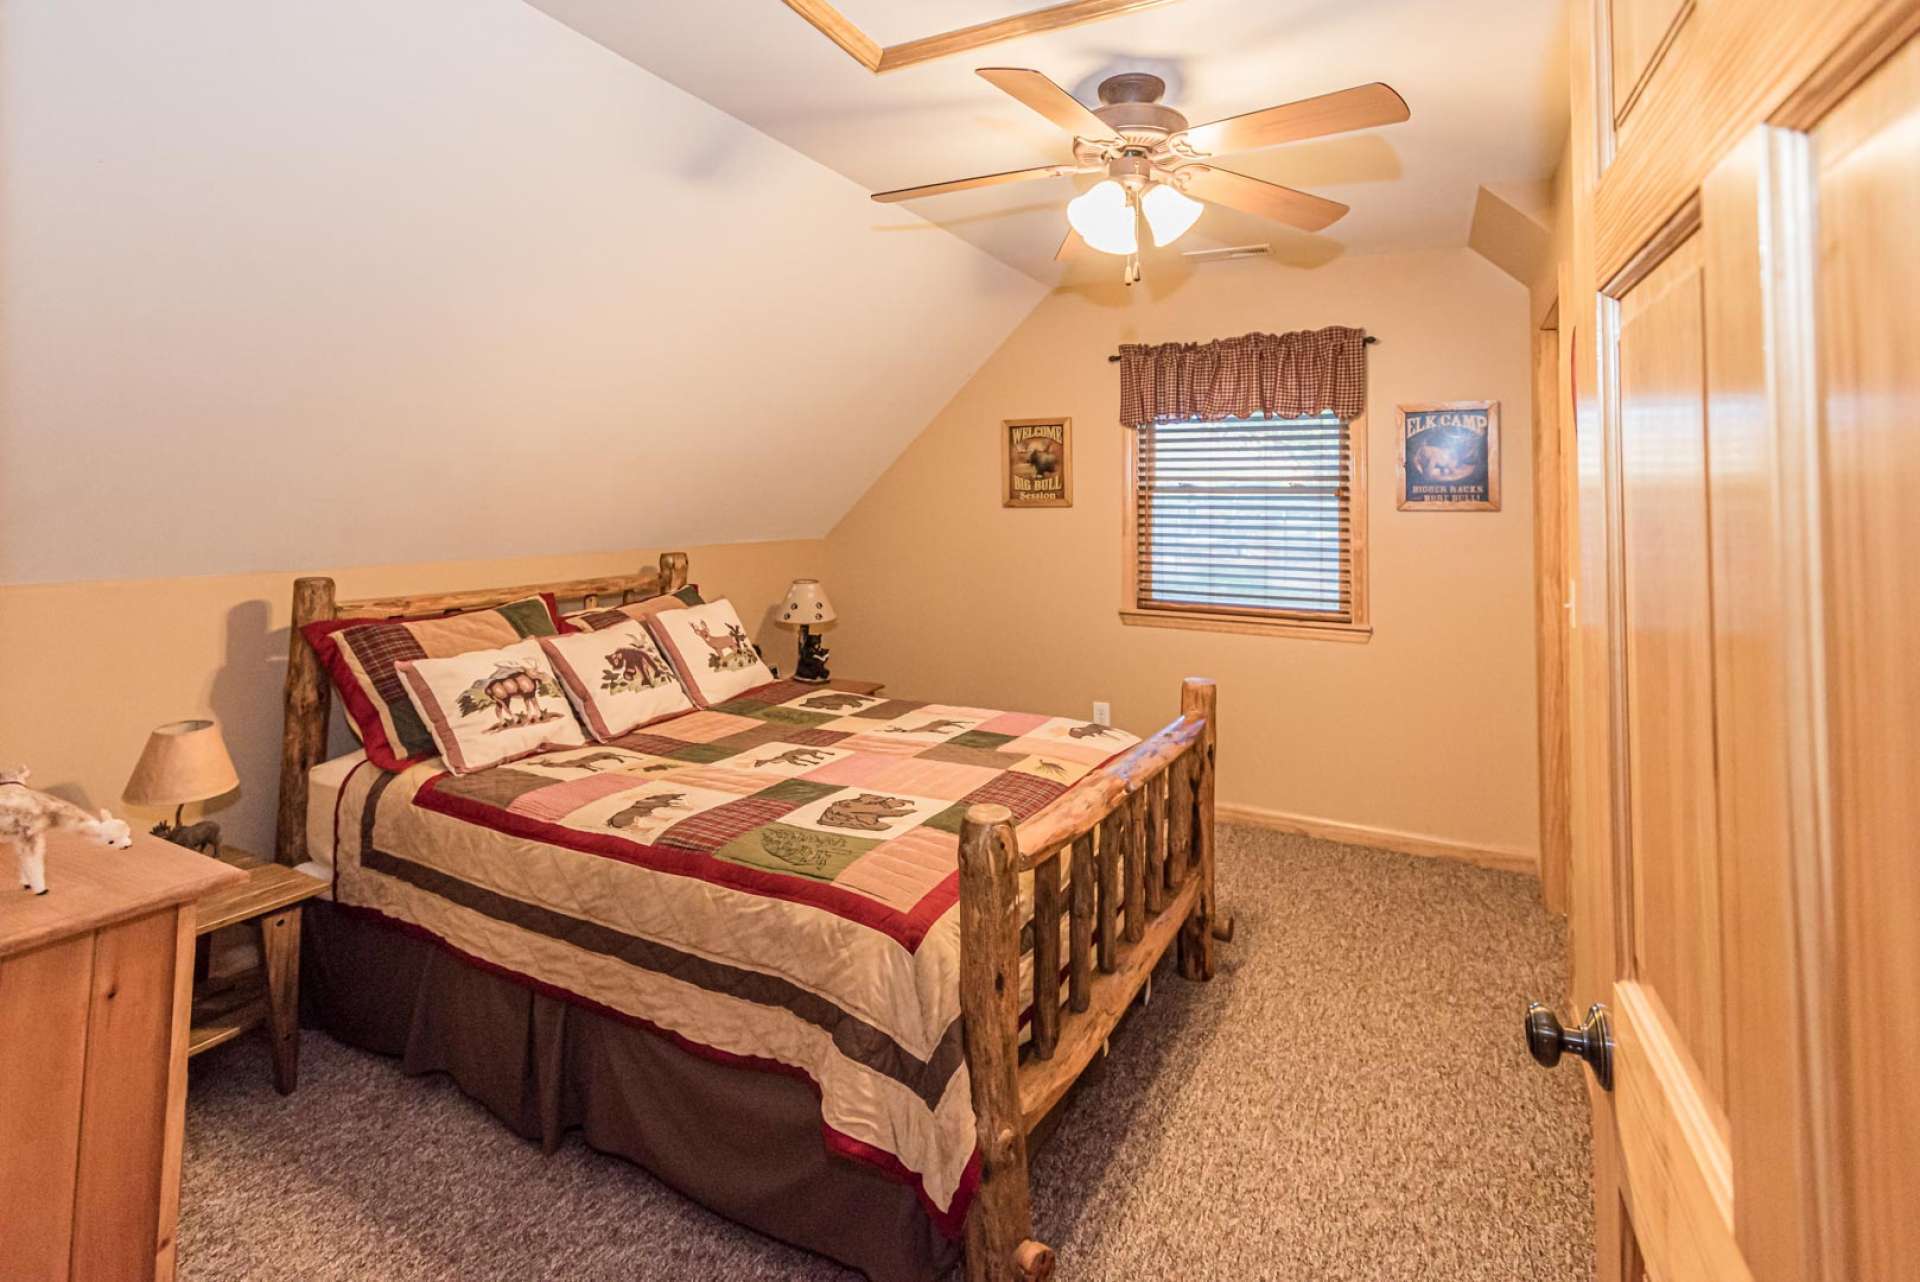 The upper level guest bedroom is cozy and inviting.